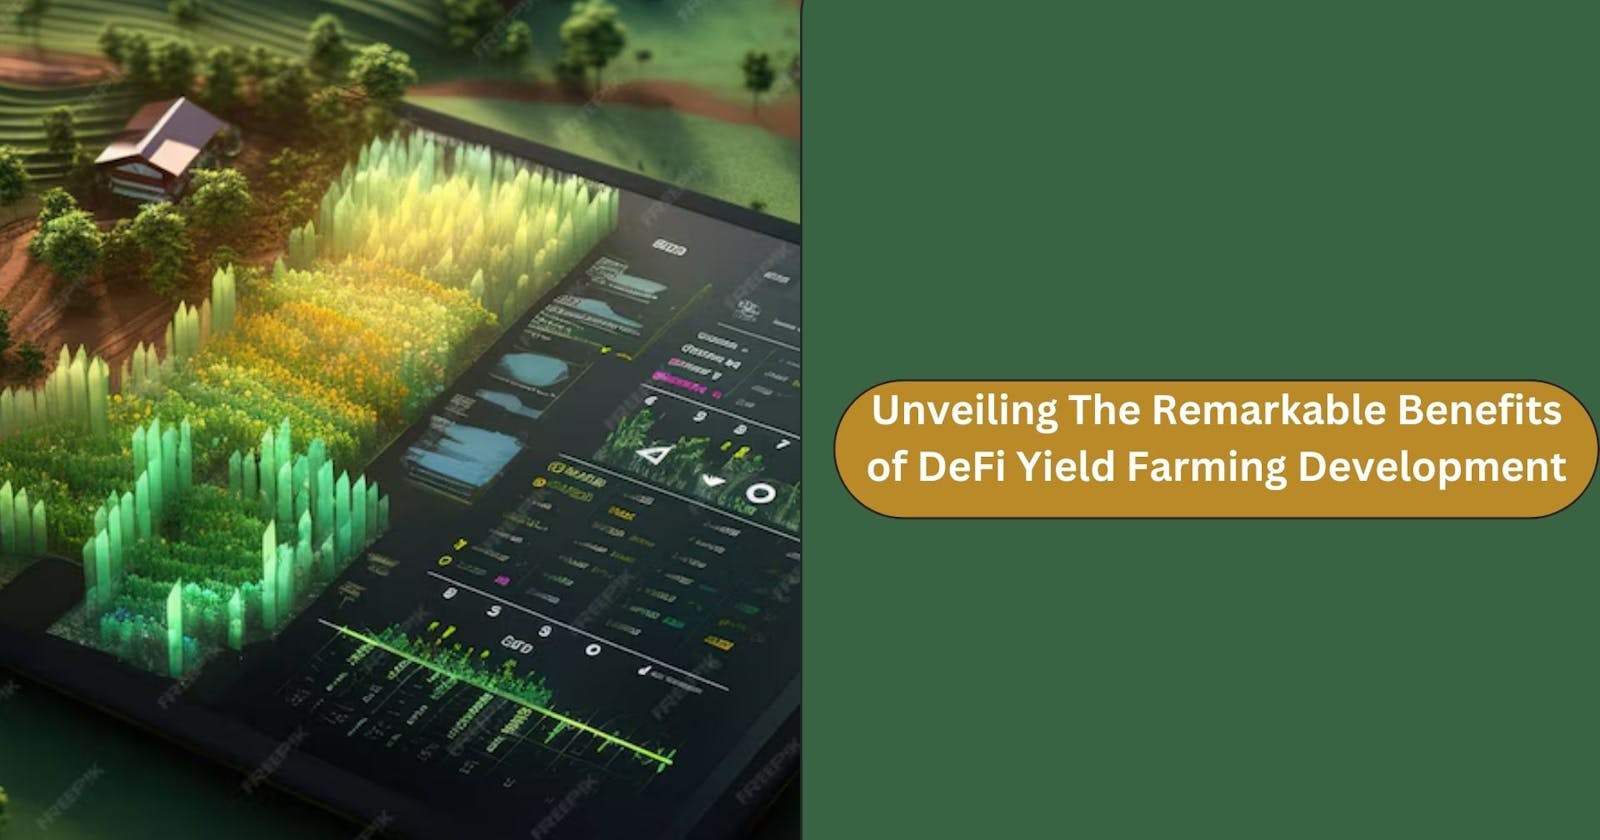 Unveiling the Remarkable Benefits of DeFi Yield Farming Development